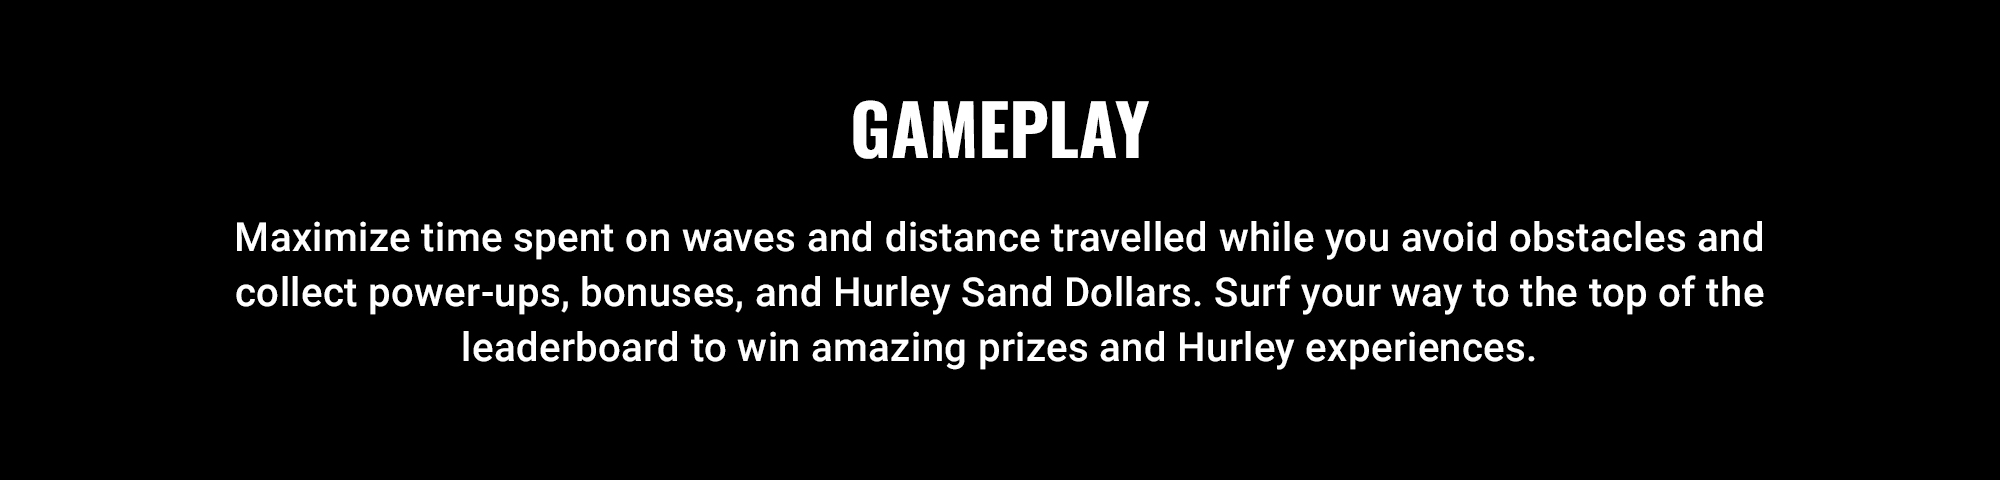 GAMEPLAY  Maximize time spent on waves and distance travelled while you avoid obstacles and collect power-ups, bonuses, and Hurley Sand Dollars. Surf your way to the top of the leaderboard to win amazing prizes and Hurley experiences.